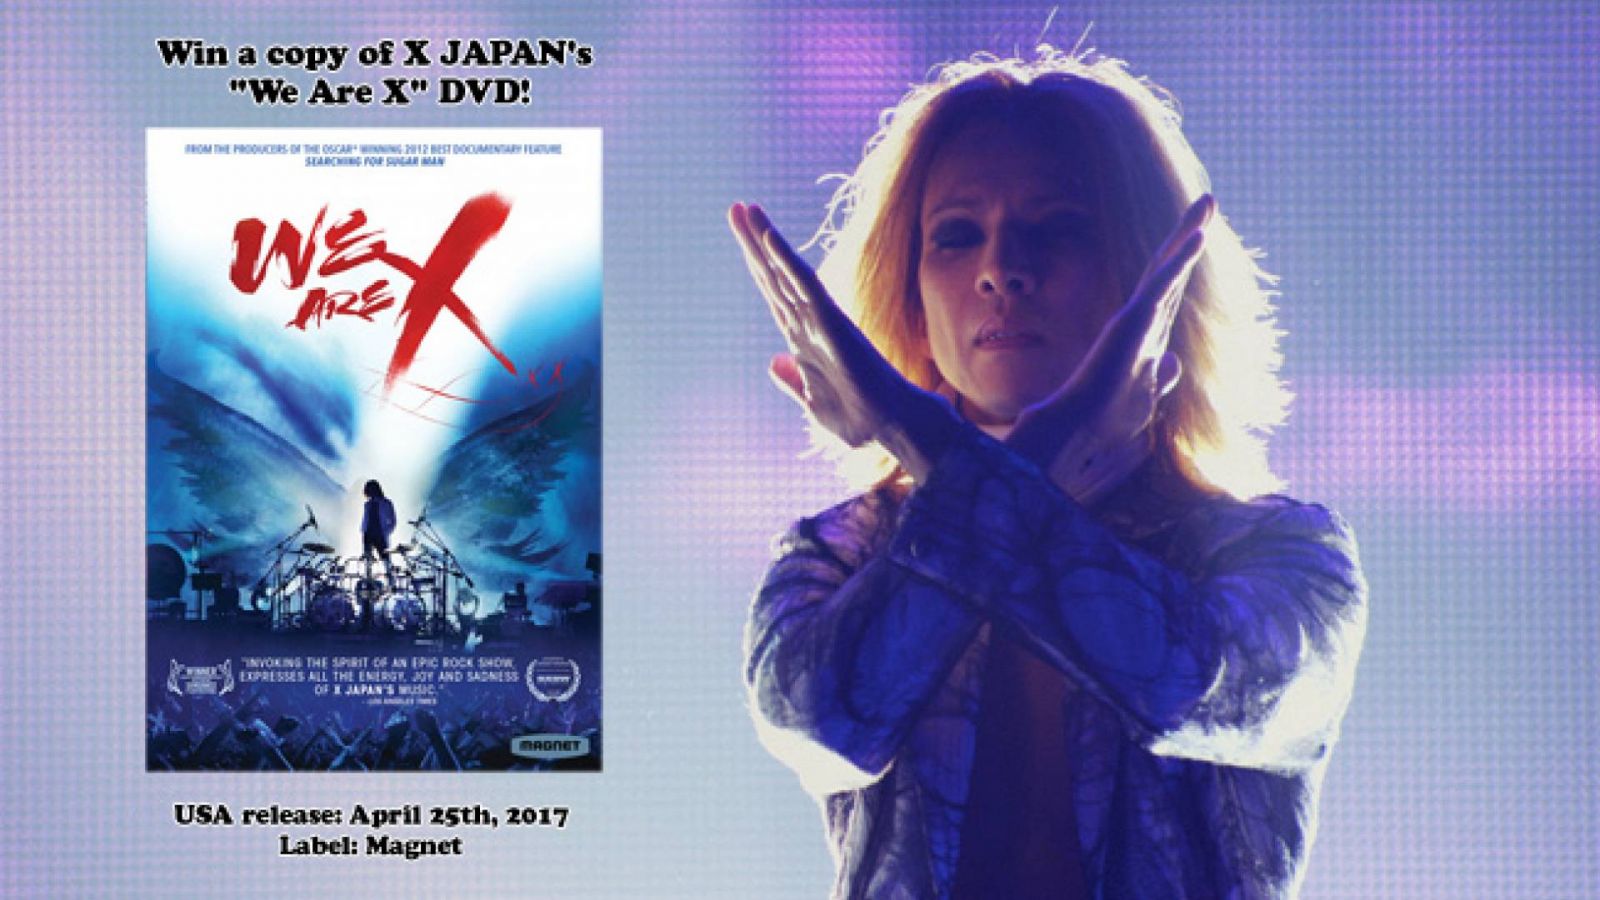 Win a Copy of X JAPAN's "We Are X" DVD! © X JAPAN